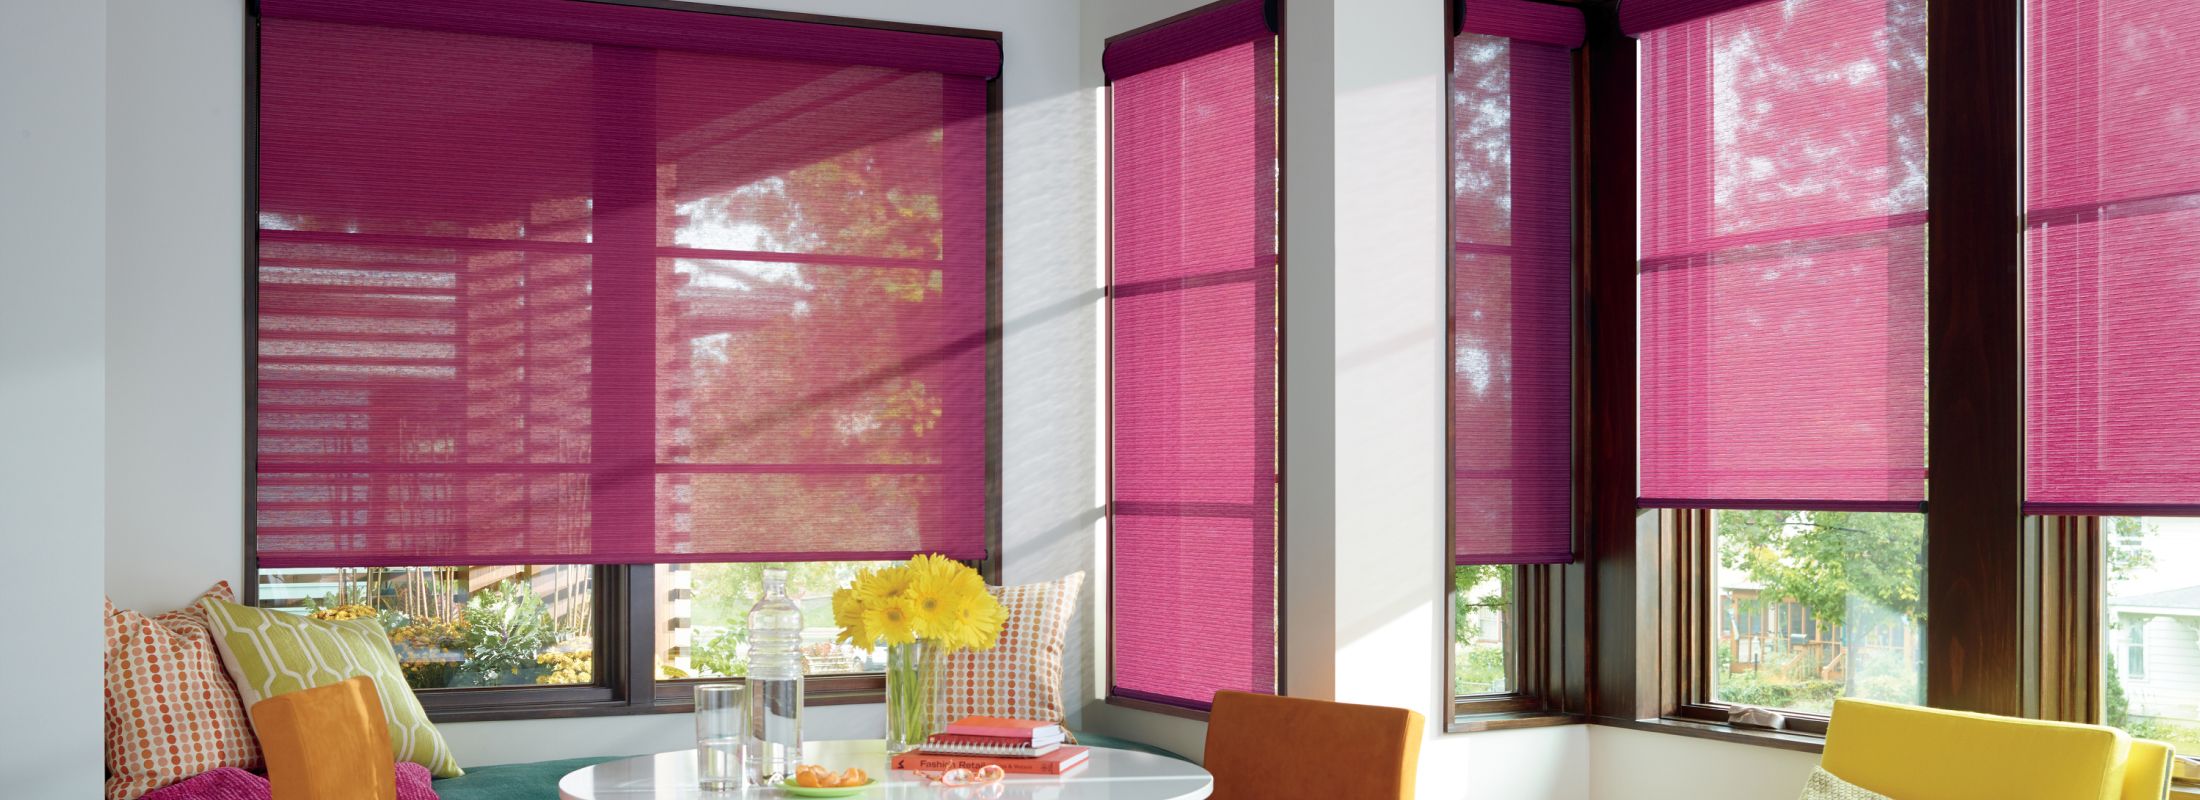 Hunter Douglas Remembrance Roller Shade with Toile Collection Fabric 